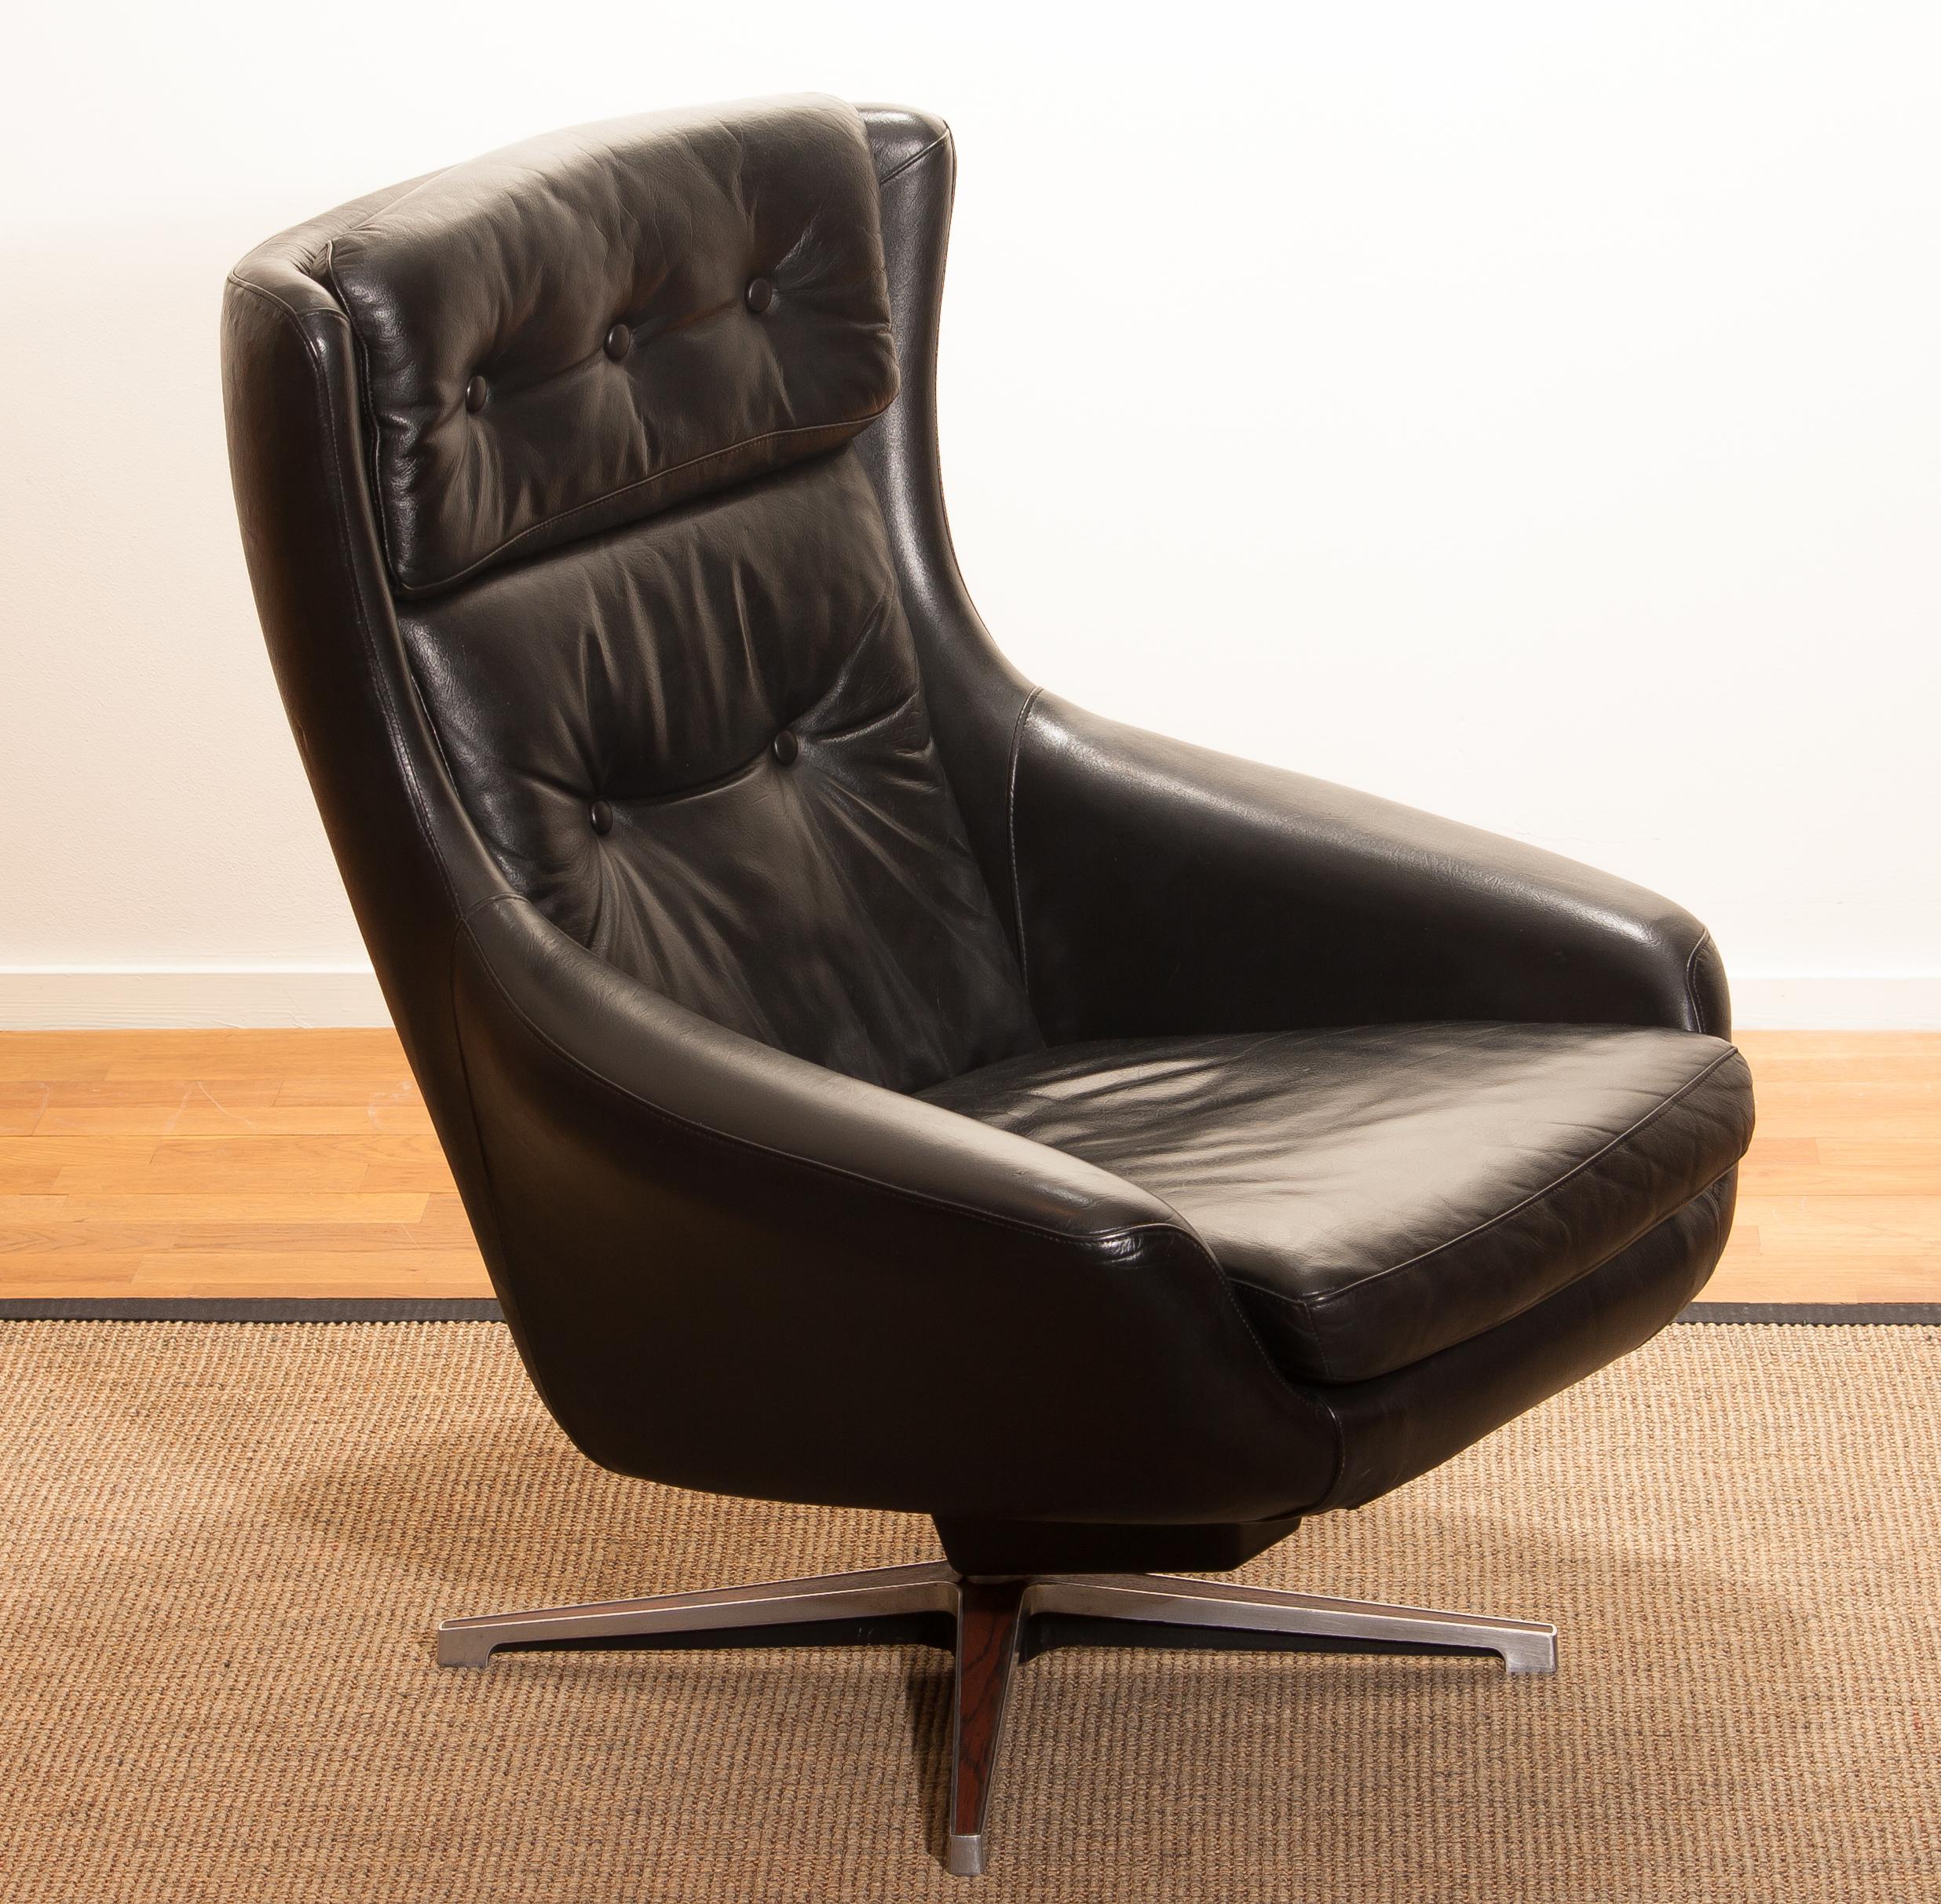 Mid-20th Century 1960s, Black Leather Swivel Rocking Lounge Chair by Lennart Bender